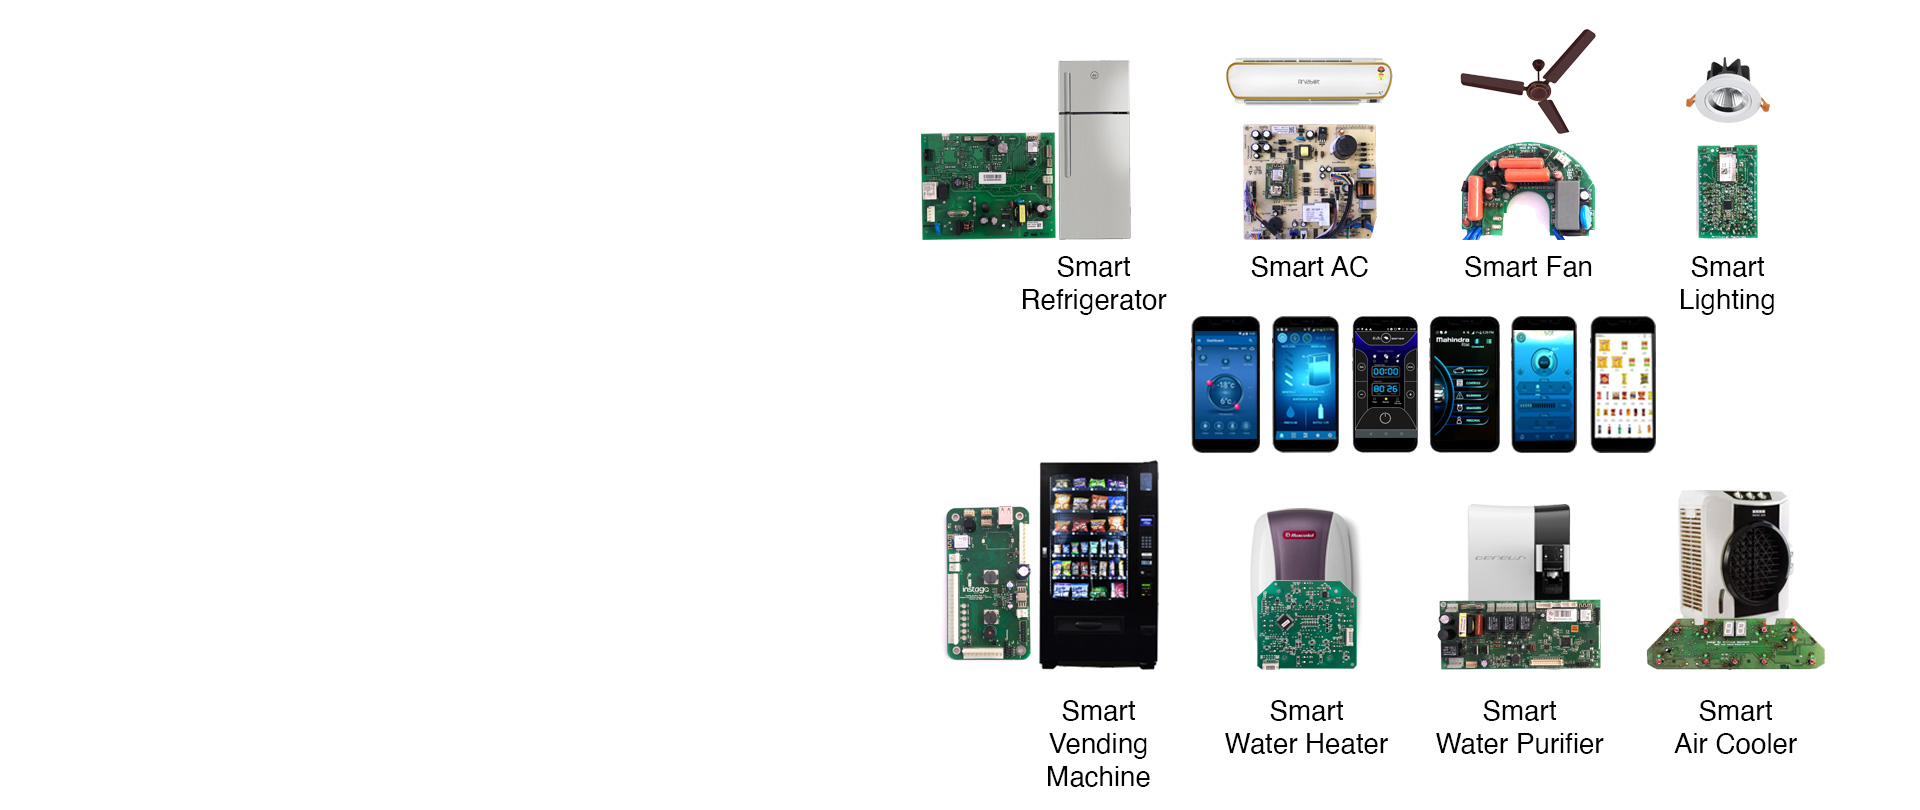 SMART appliances shown with pcbs and mobile apps